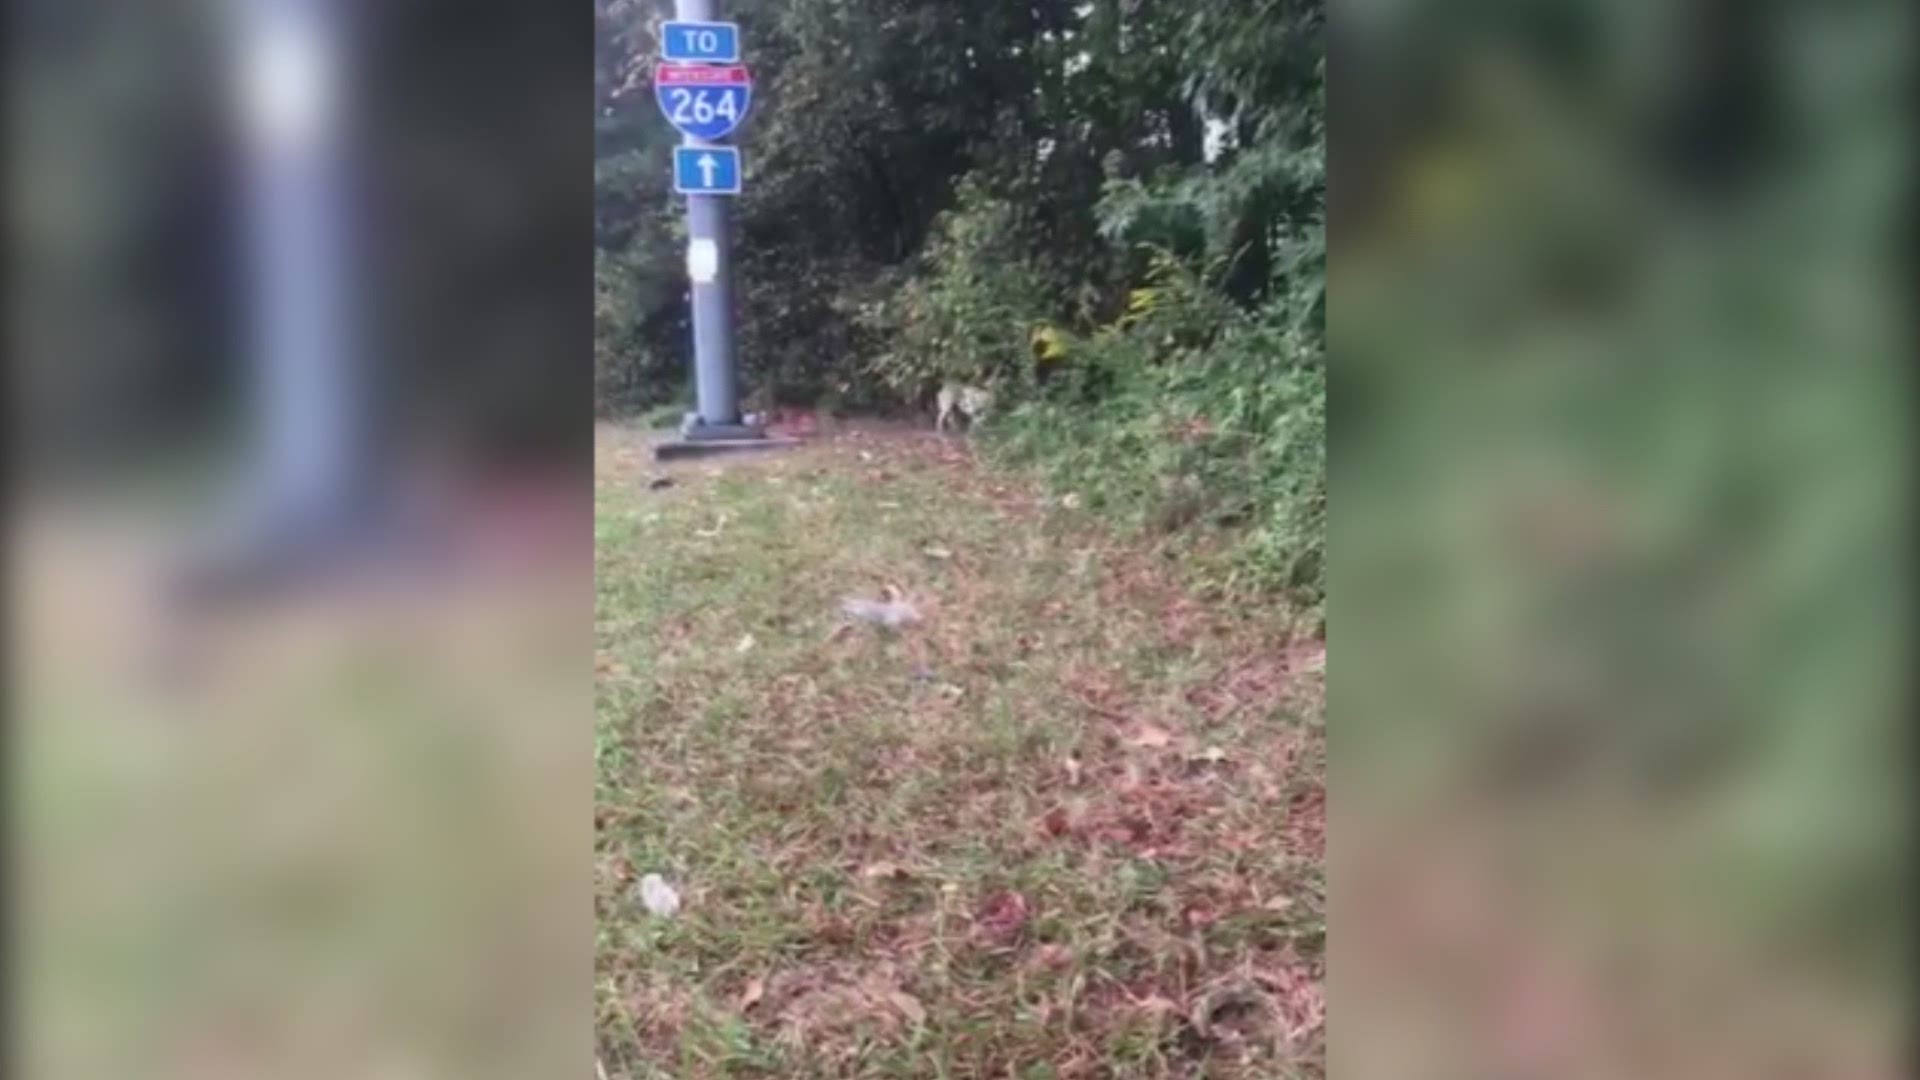 A hound mix has been on the run from dog catchers for months near the Lynnhaven Mall. People keep feeding the dog so it won't go into traps set for her.